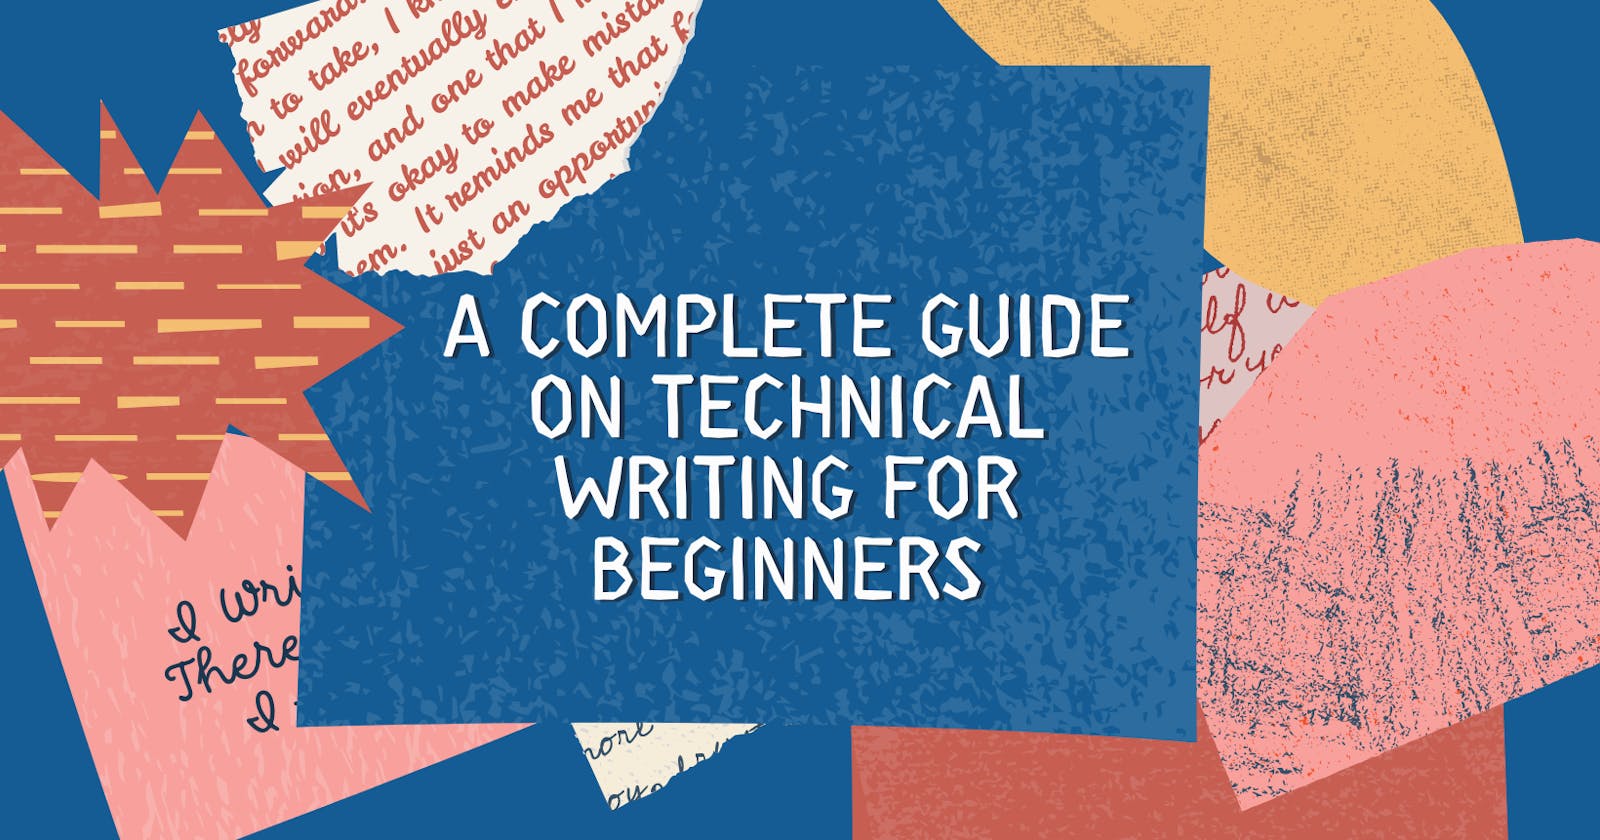 A Complete Guide on Technical Writing For Beginners